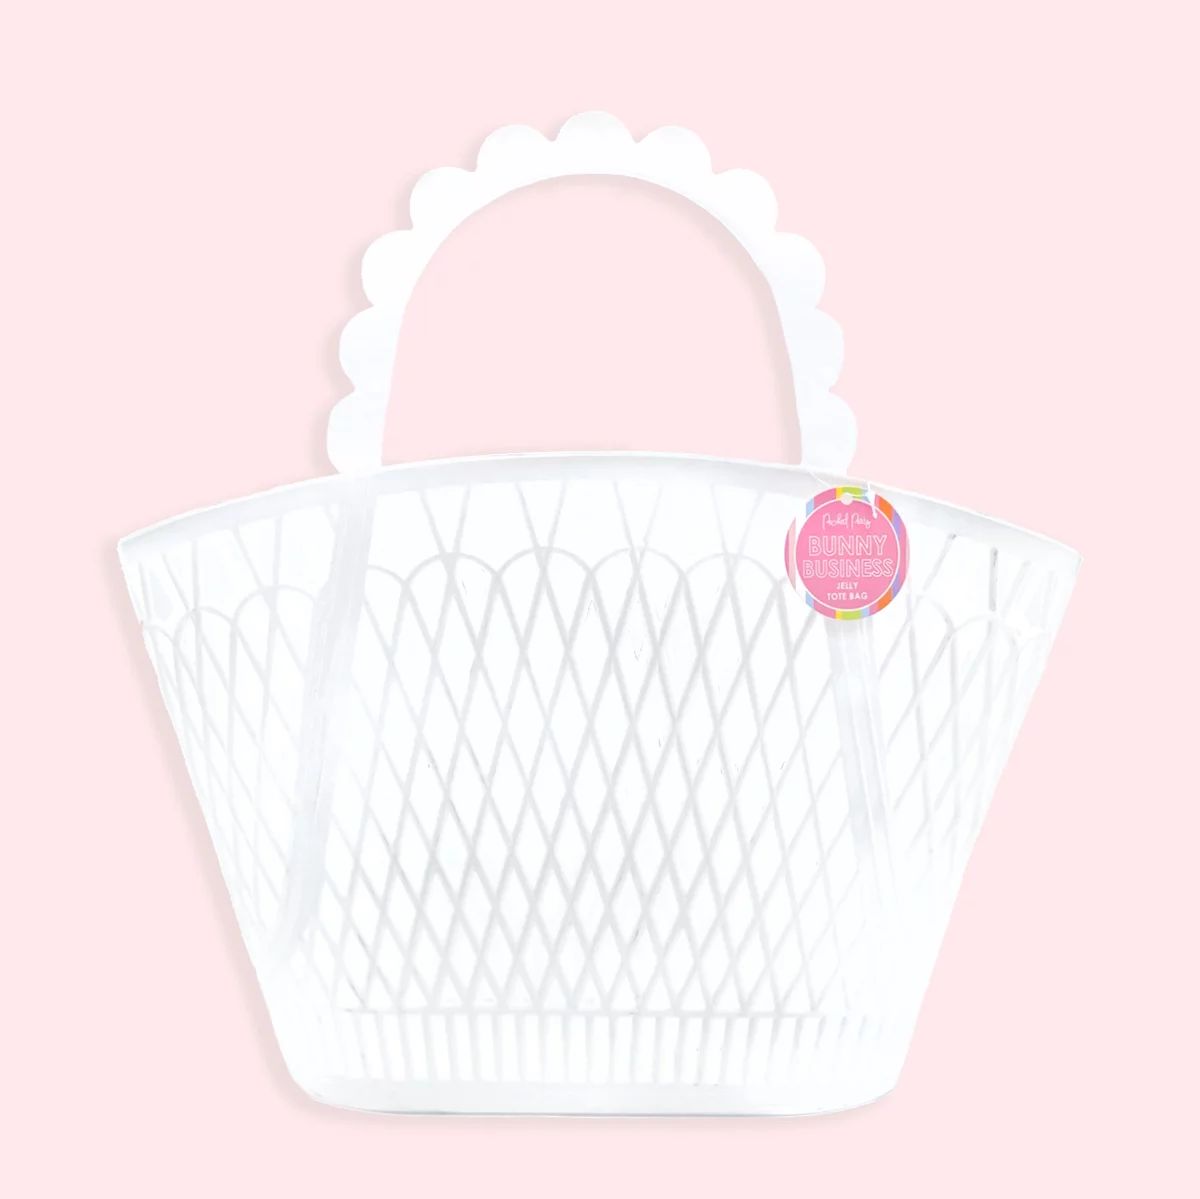 Way To Celebrate Packed Party 'Bunny Business' White Basket Tote, 16"X10.5" | Walmart (US)